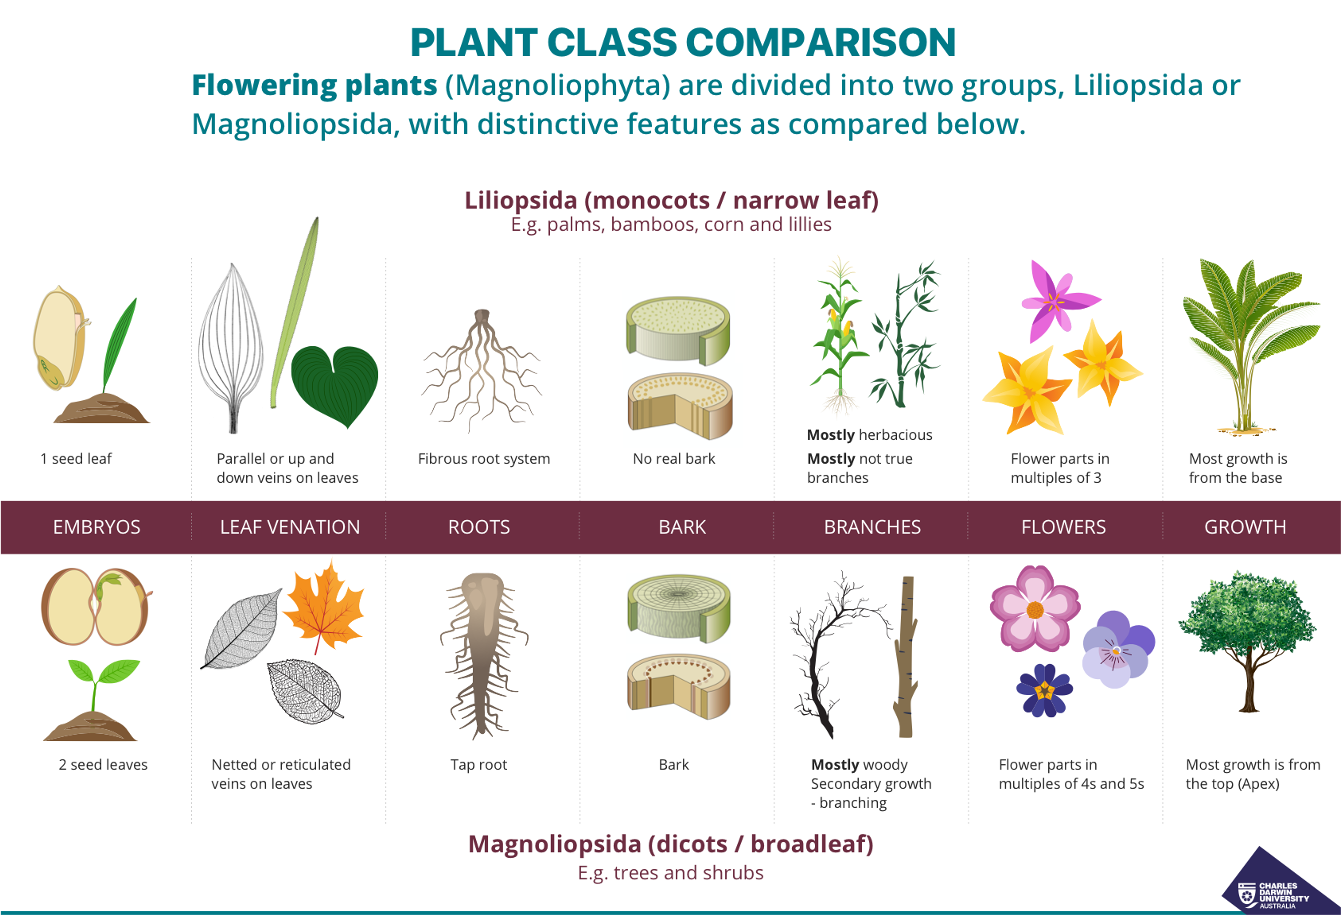 Flowering plants are divided into two groups, Liliopsida or Magnoliopsida, with distinctinve features as compared in the chart. Liliopsida / narrow leaf eg palms, bamboos, corn, and lillies and Magnoliopsida/ broadleaf eg trees and shrubs